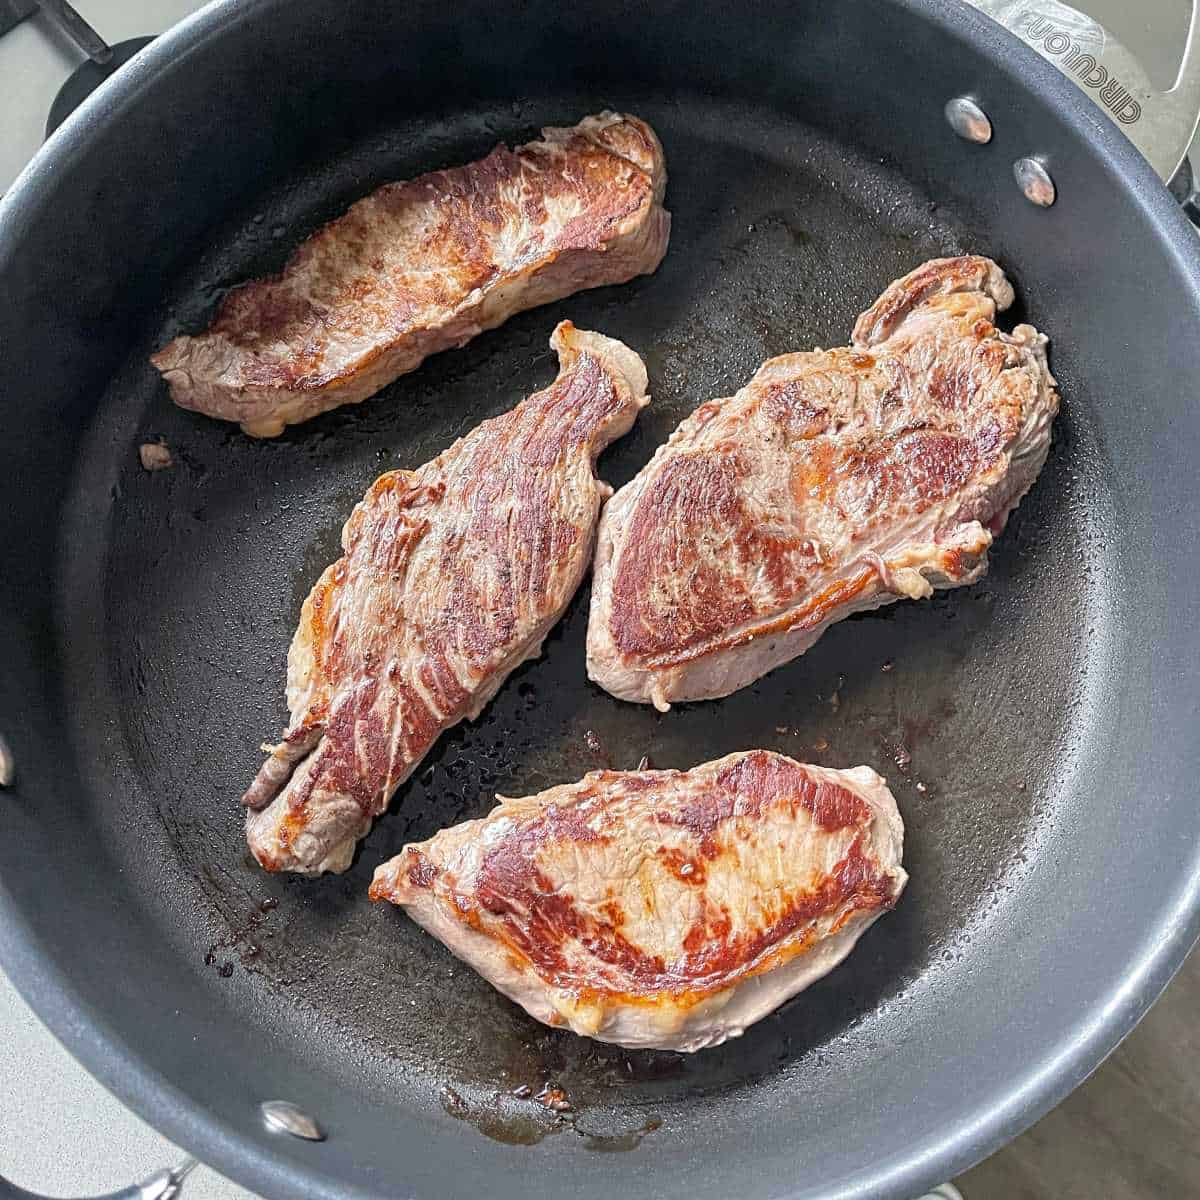 Four pieces of steak frying in a pan